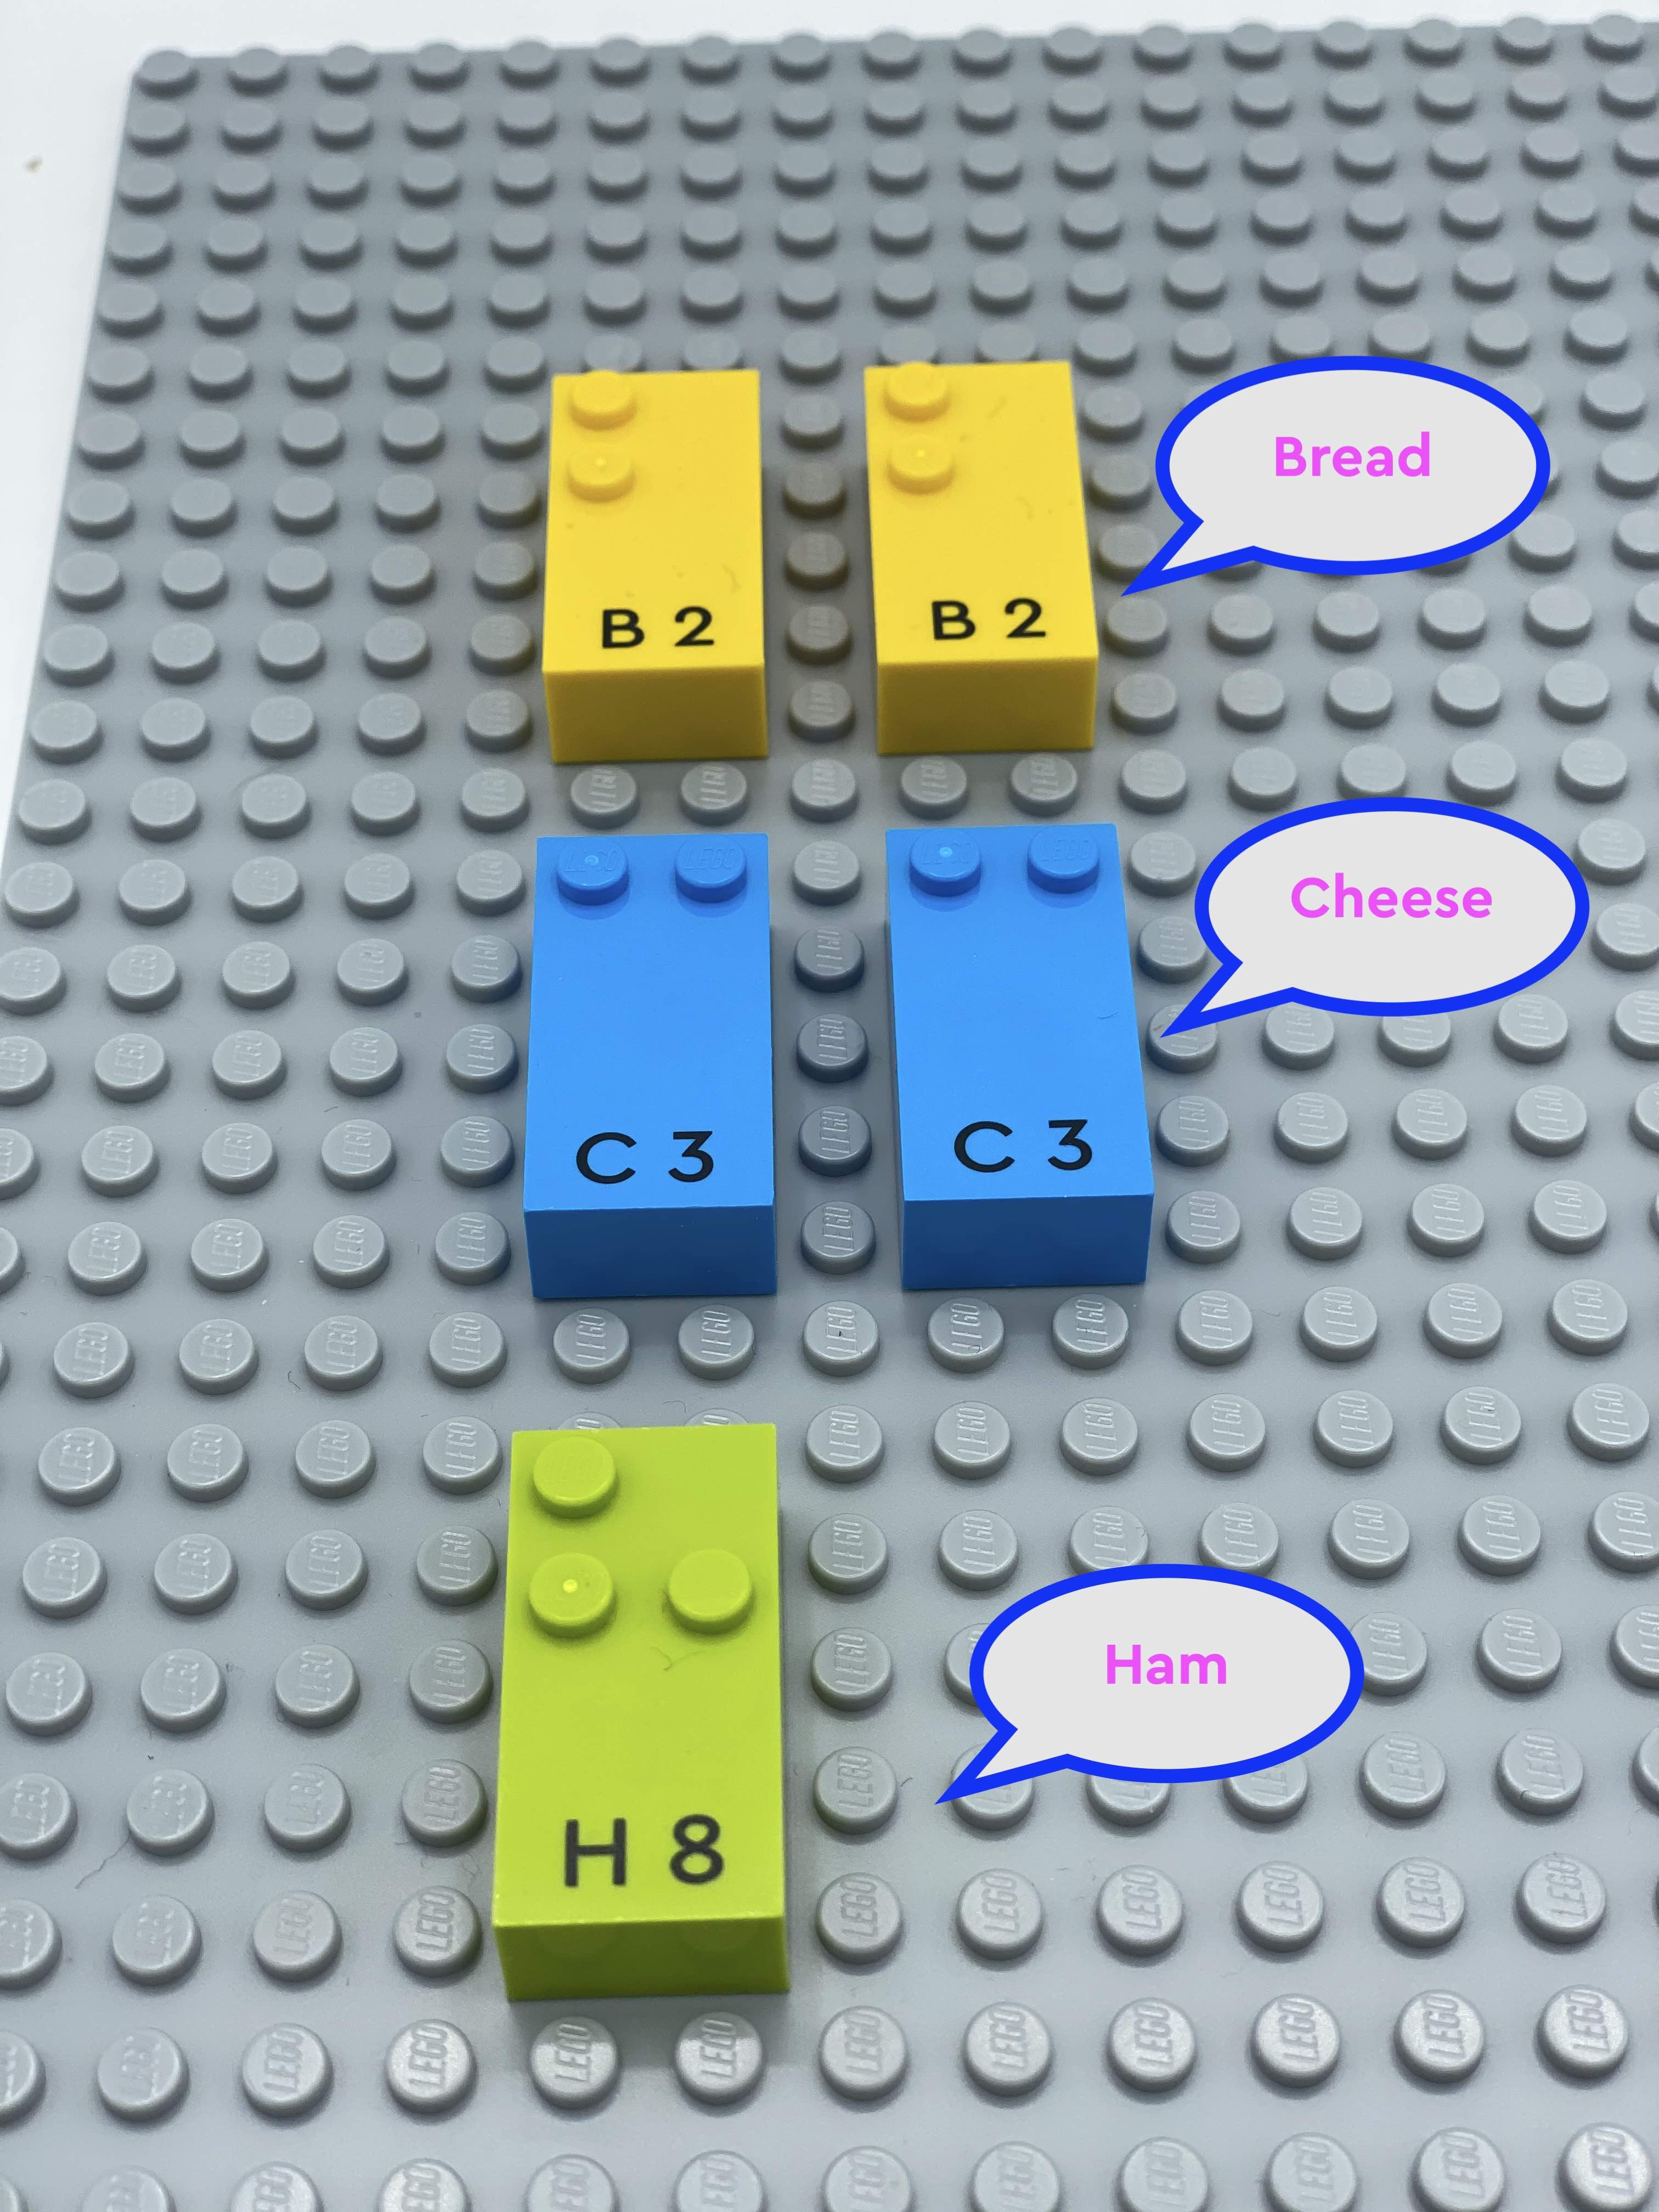 5 bricks on a baseplate: 2 "B" bricks for Bread, 2 "C" bricks for Cheese and 1 "H" brick for Ham.